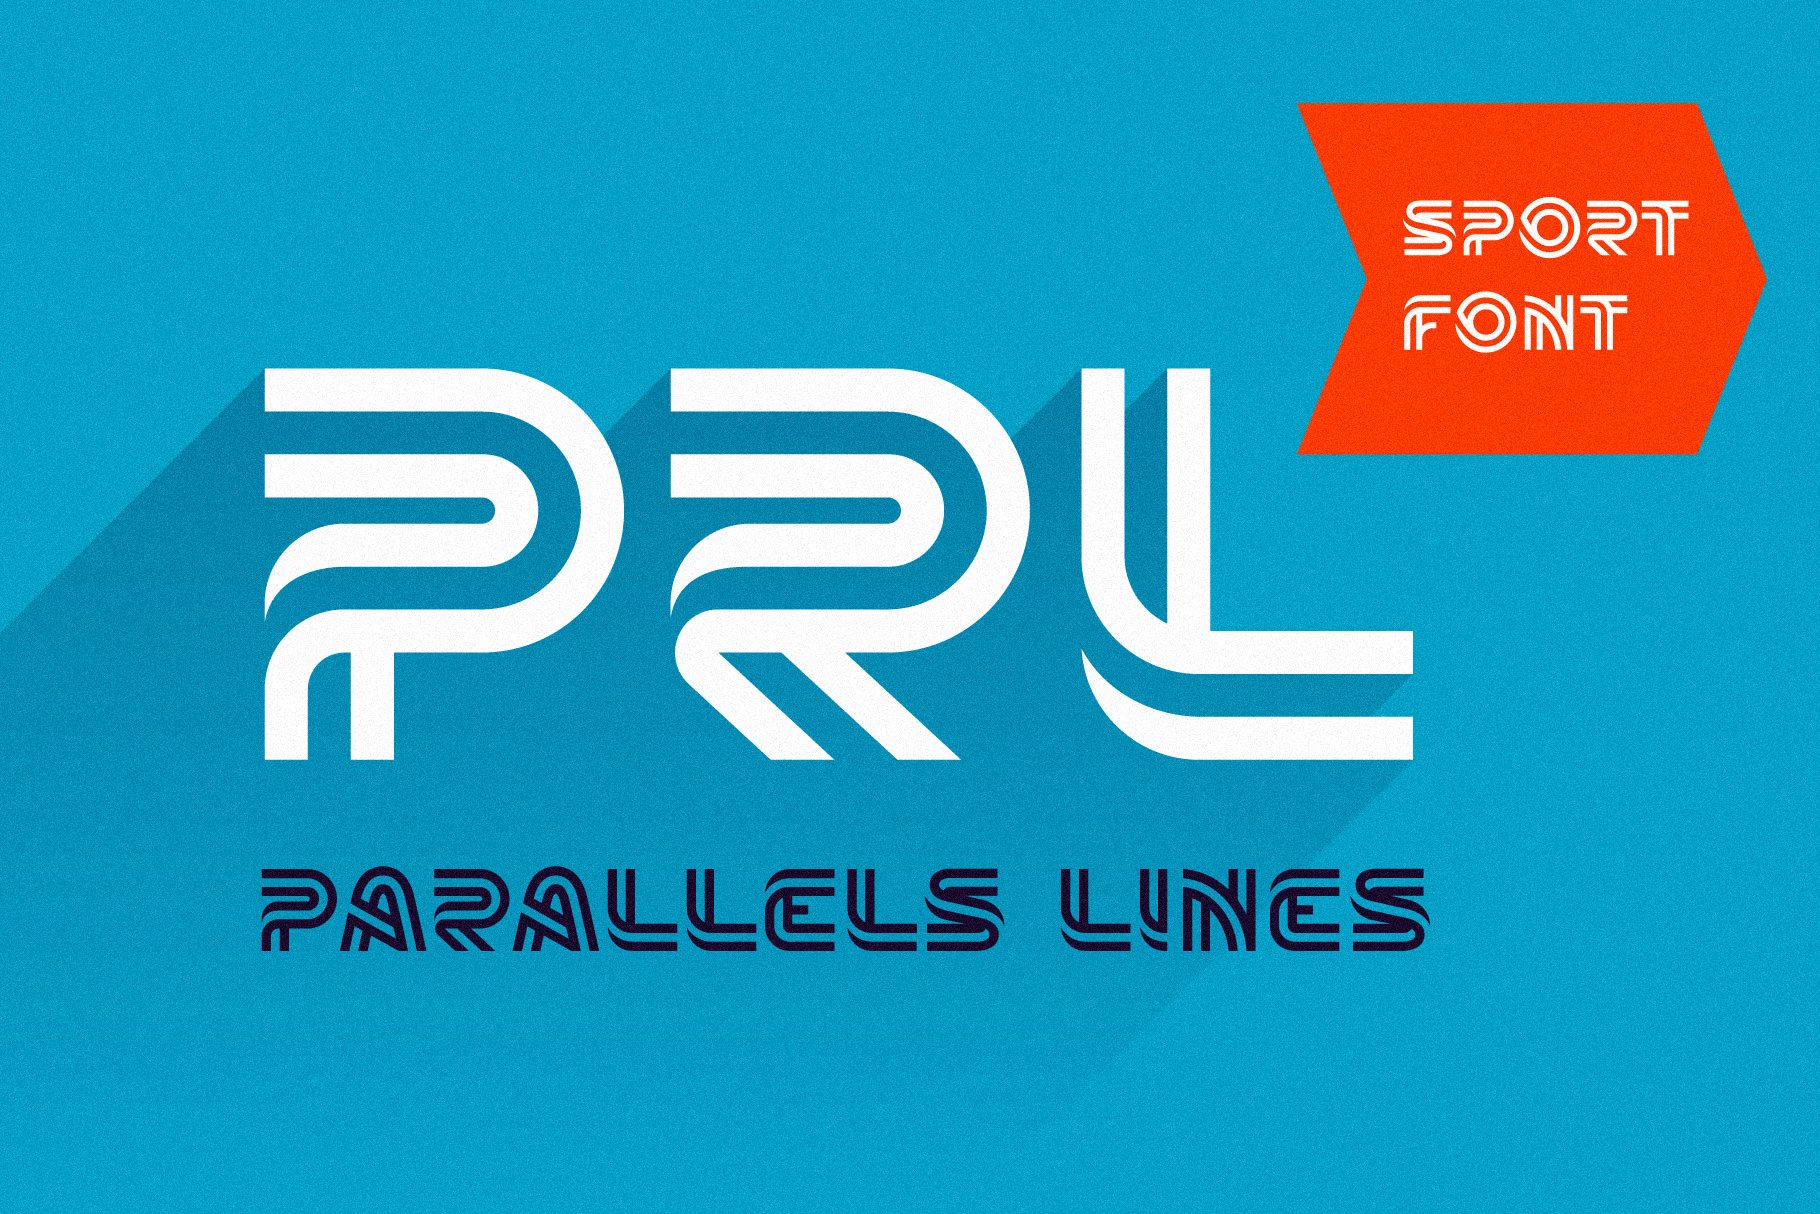 Parallels Lines font cover image.